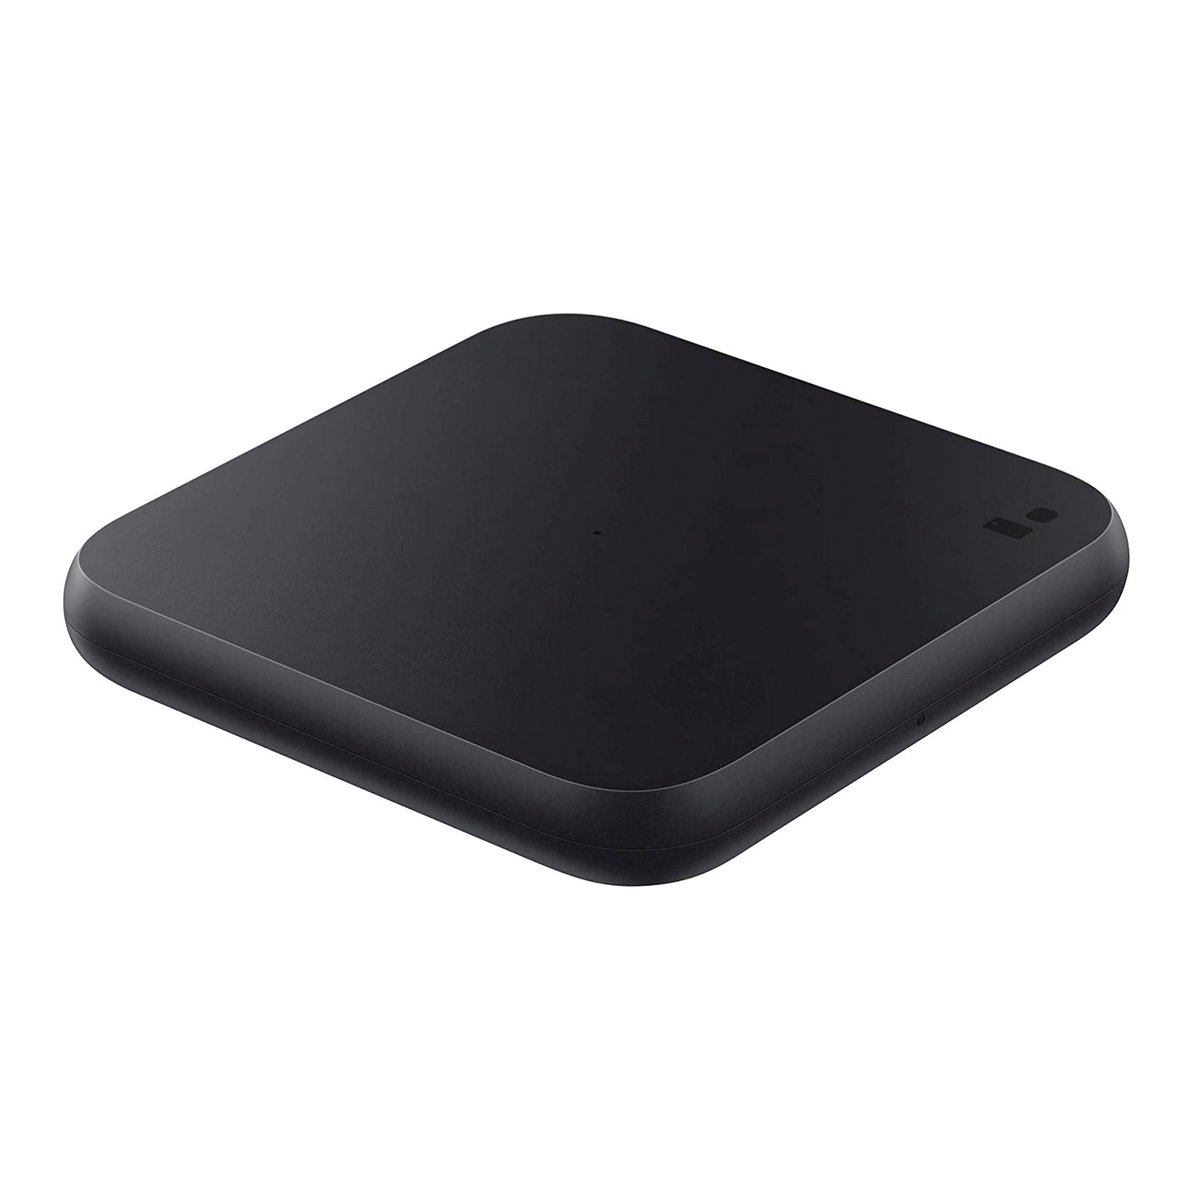 Samsung Wireless Charger Pad with Travel Adaptor P1300 Black